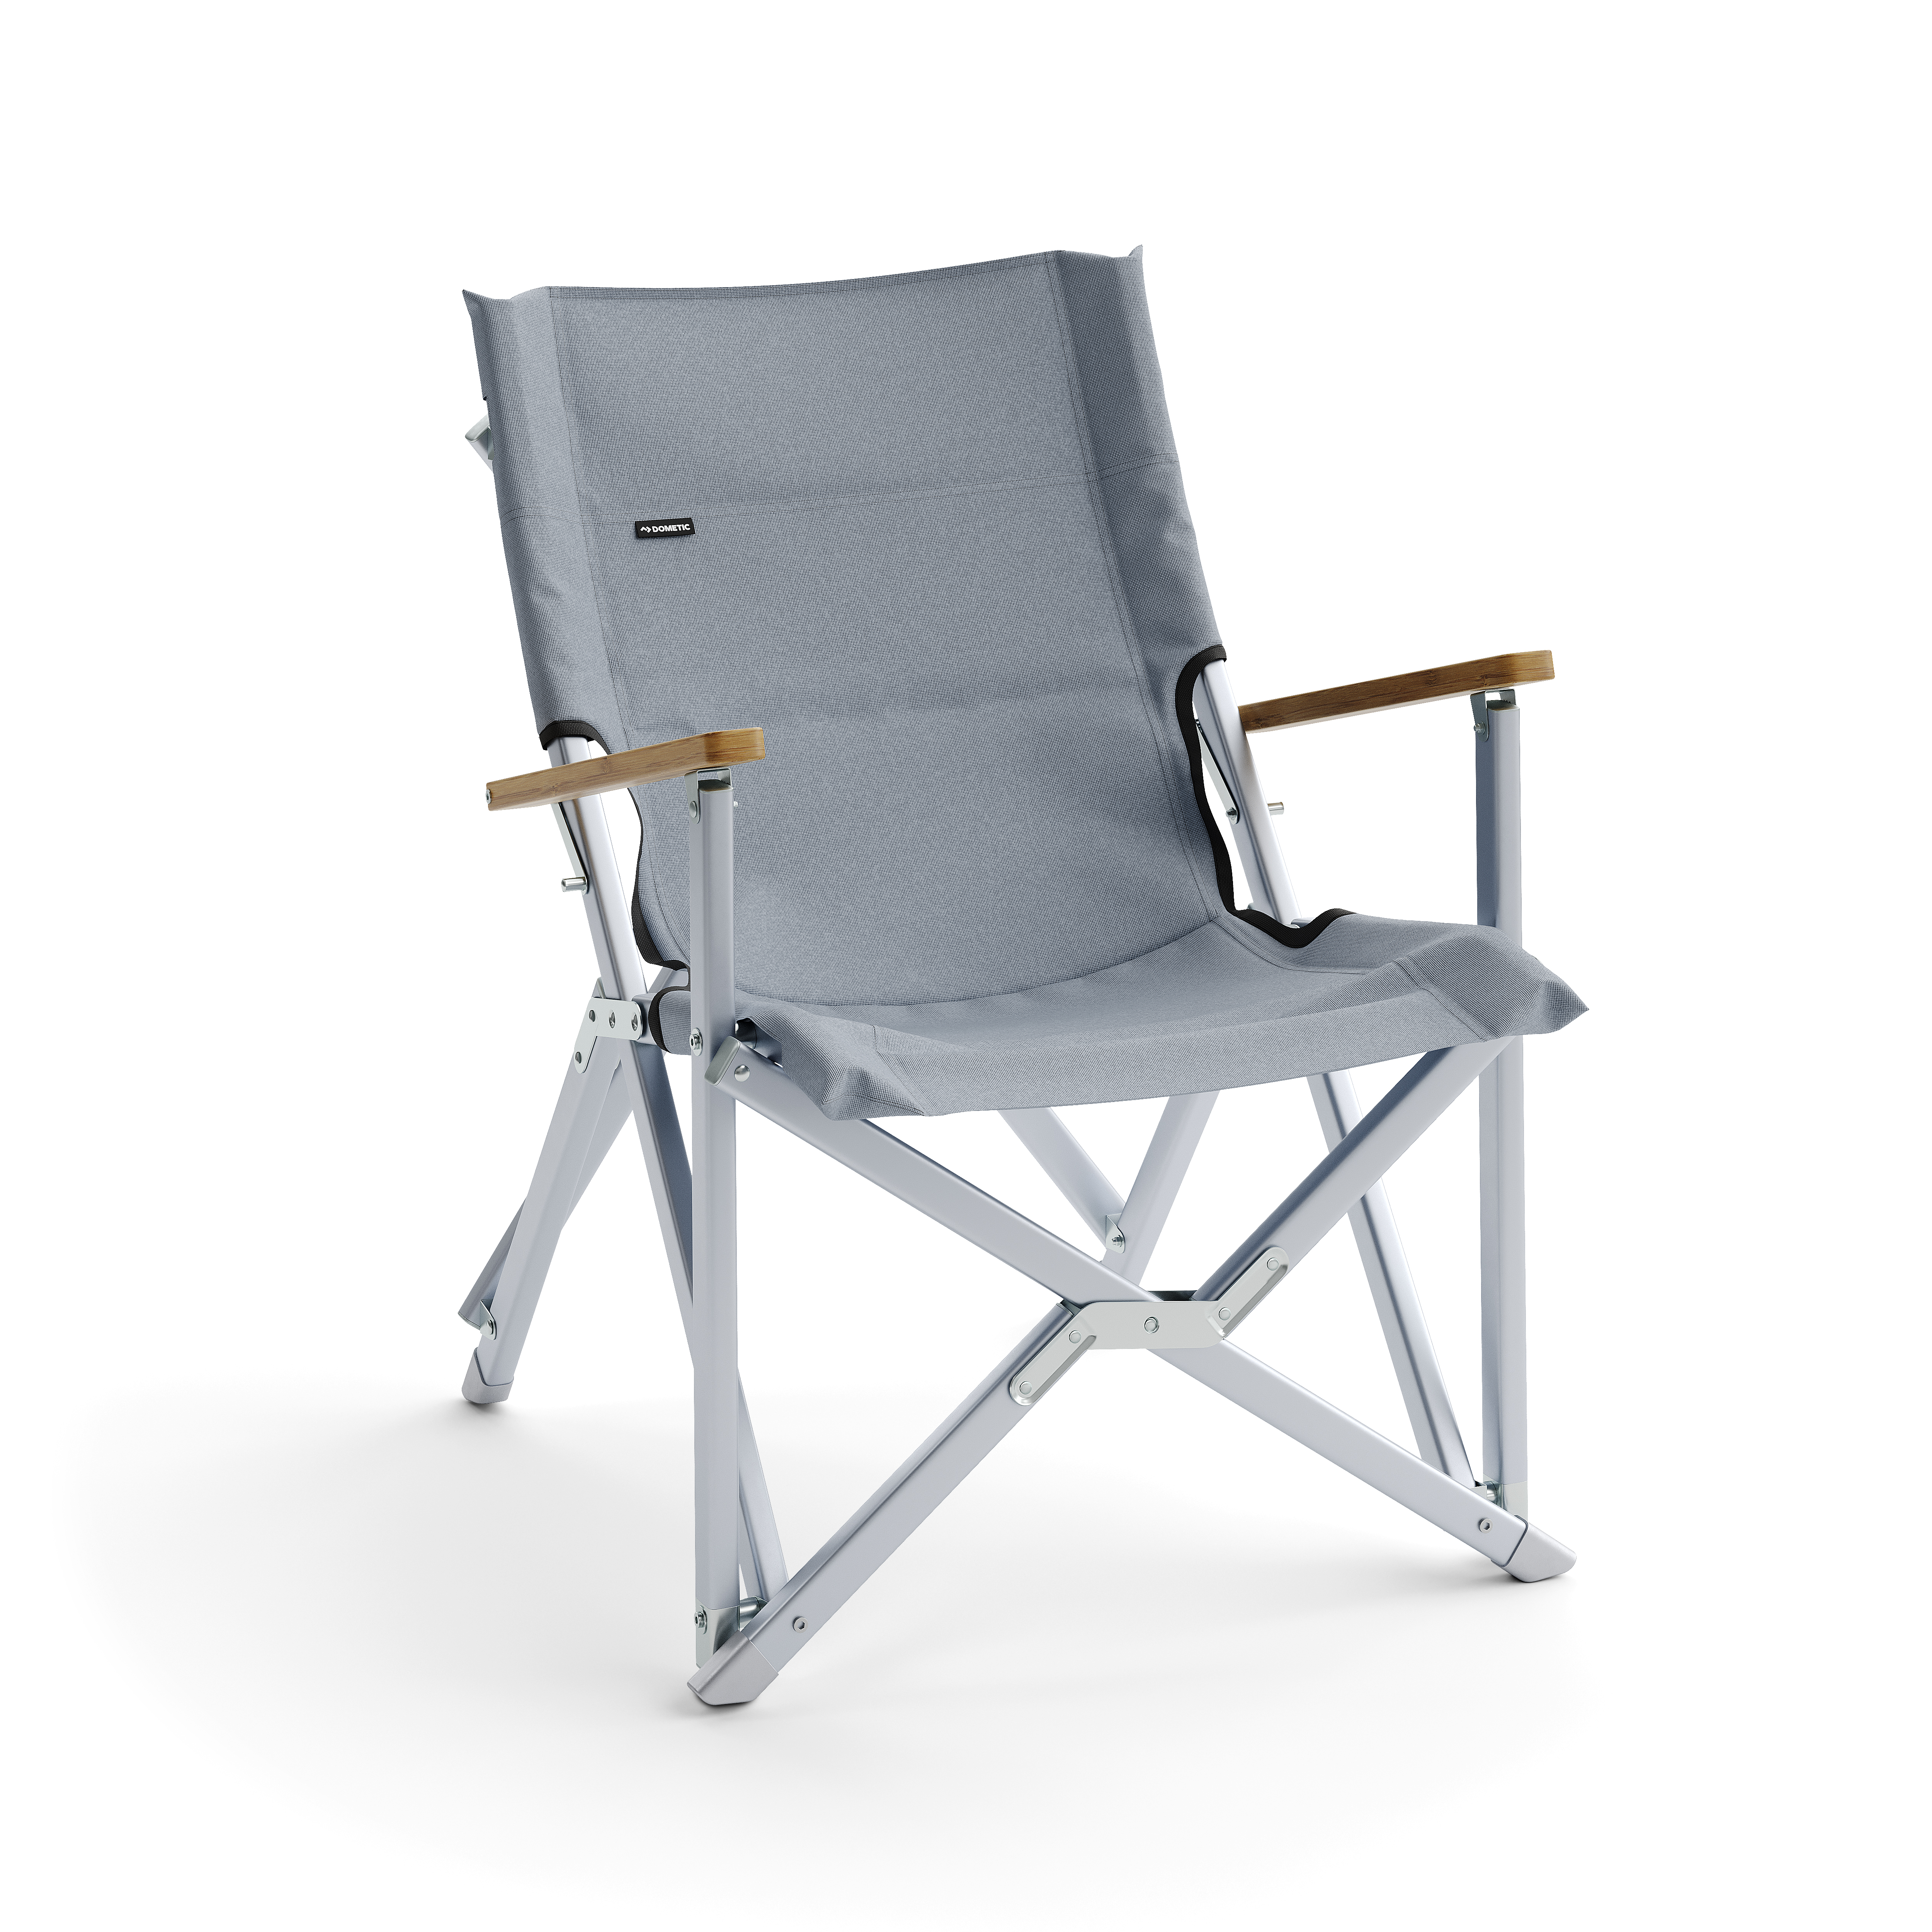 Dometic Compact Camp Chair Silt